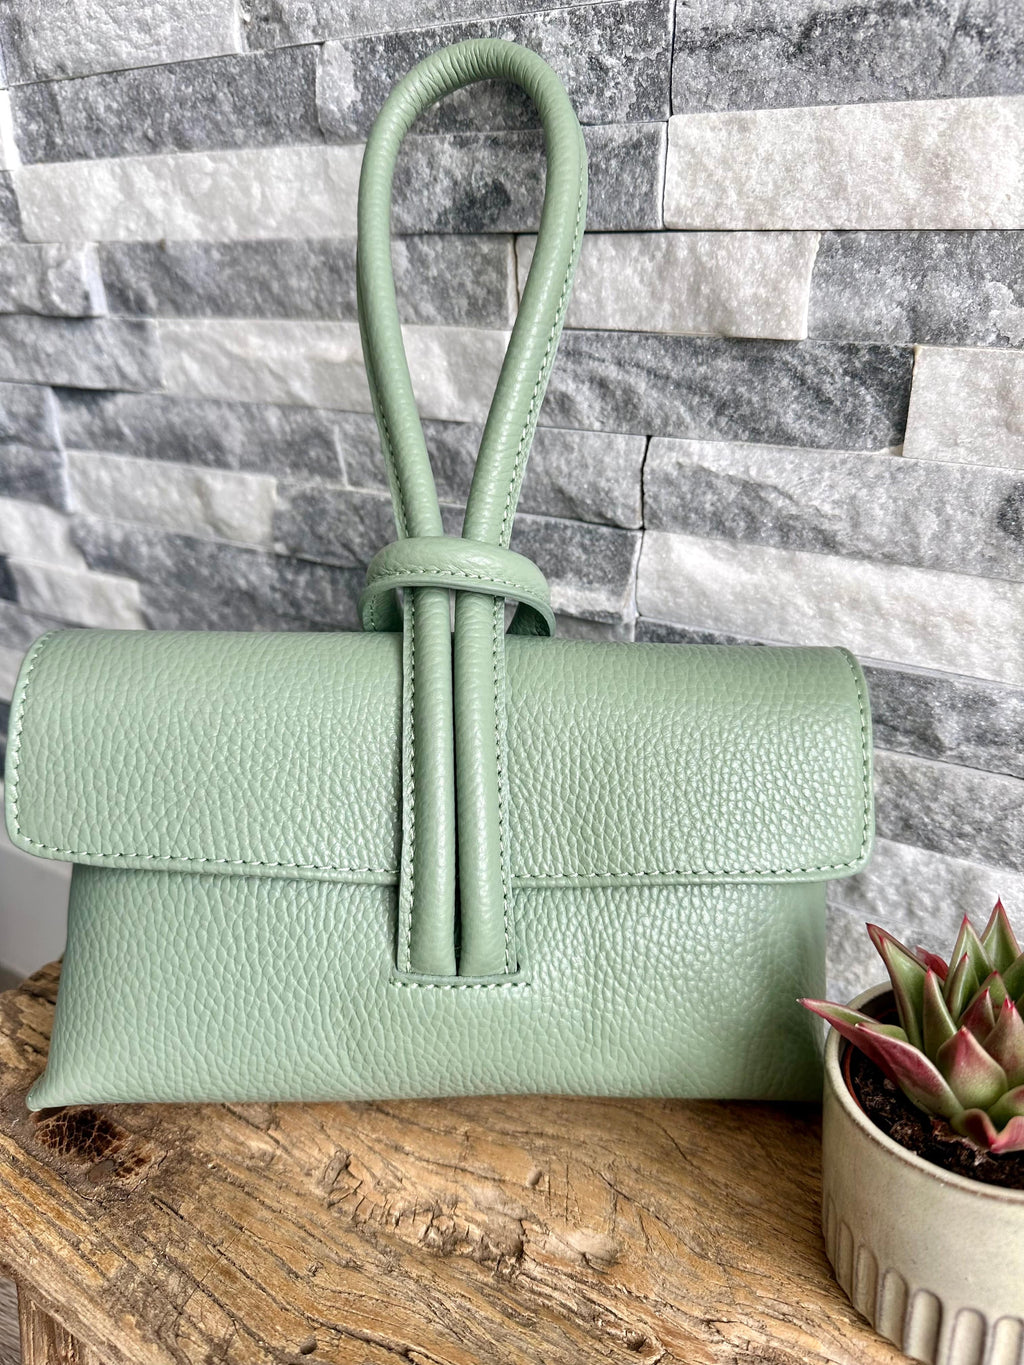 lusciousscarves Pale Green Italian Leather Clutch Bag, Evening Bag  with Loop Handle